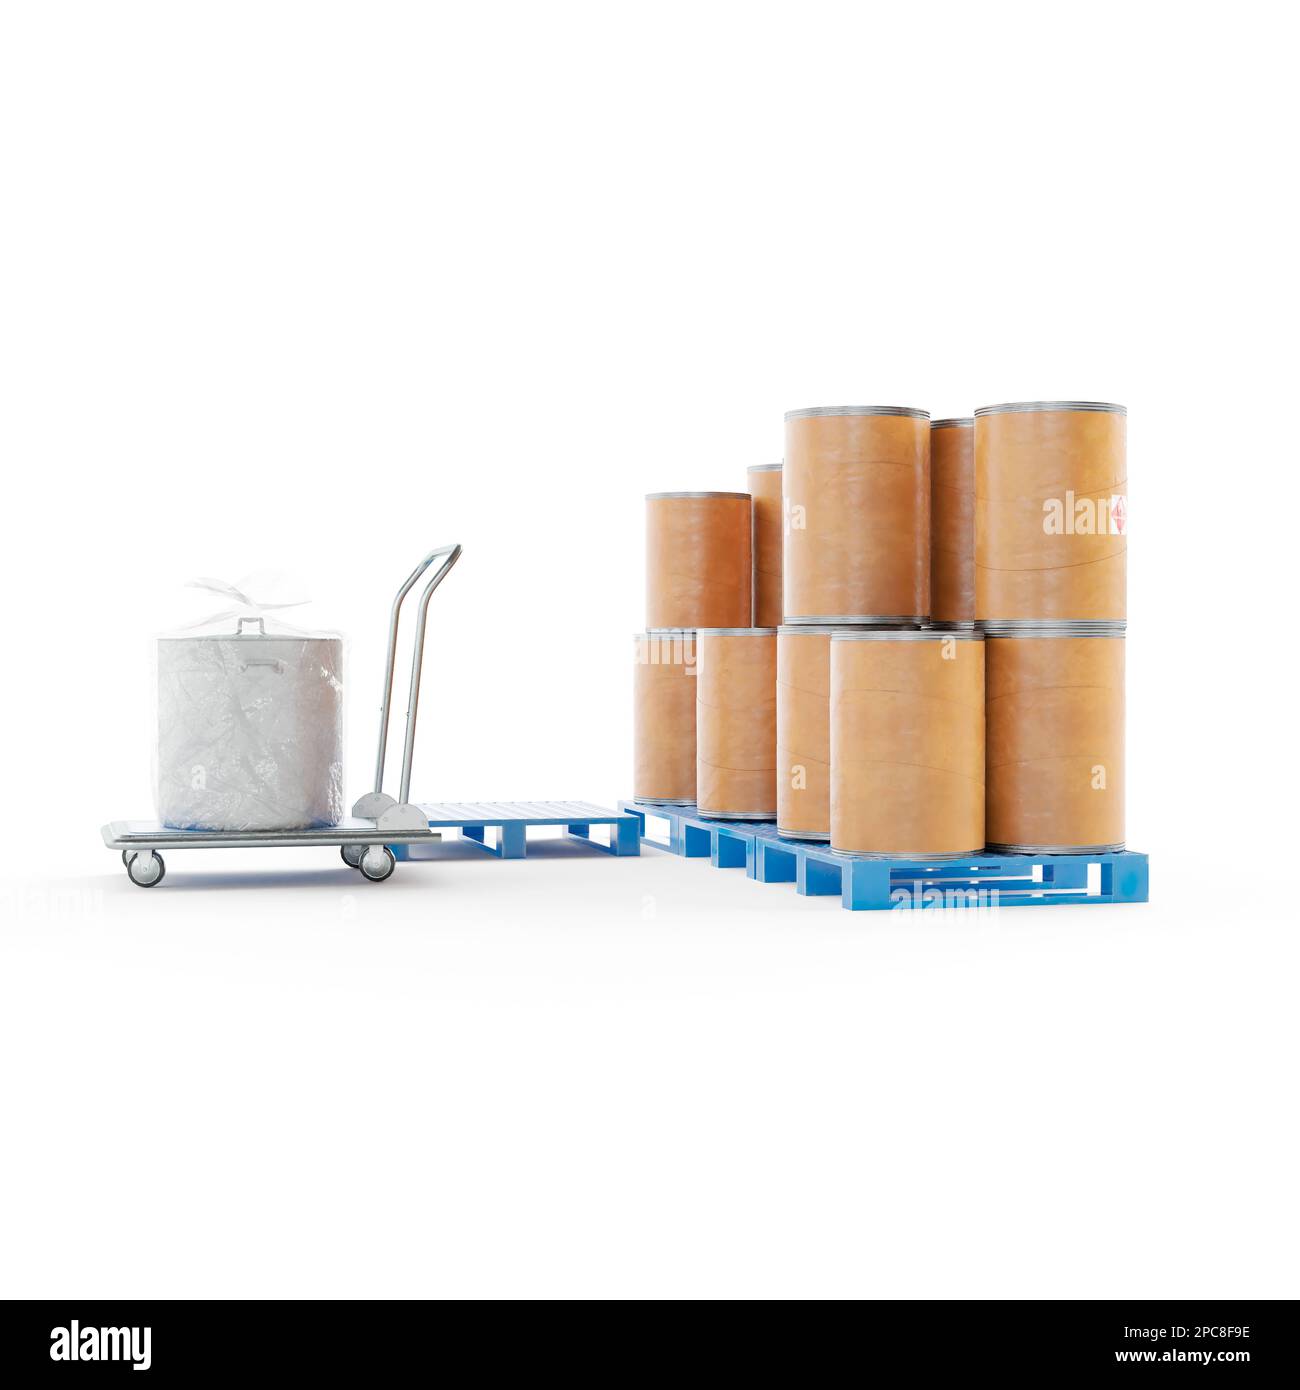 A white-painted cart with boxes stacked on top of it stands in a row of large, white barrels of milk Stock Photo